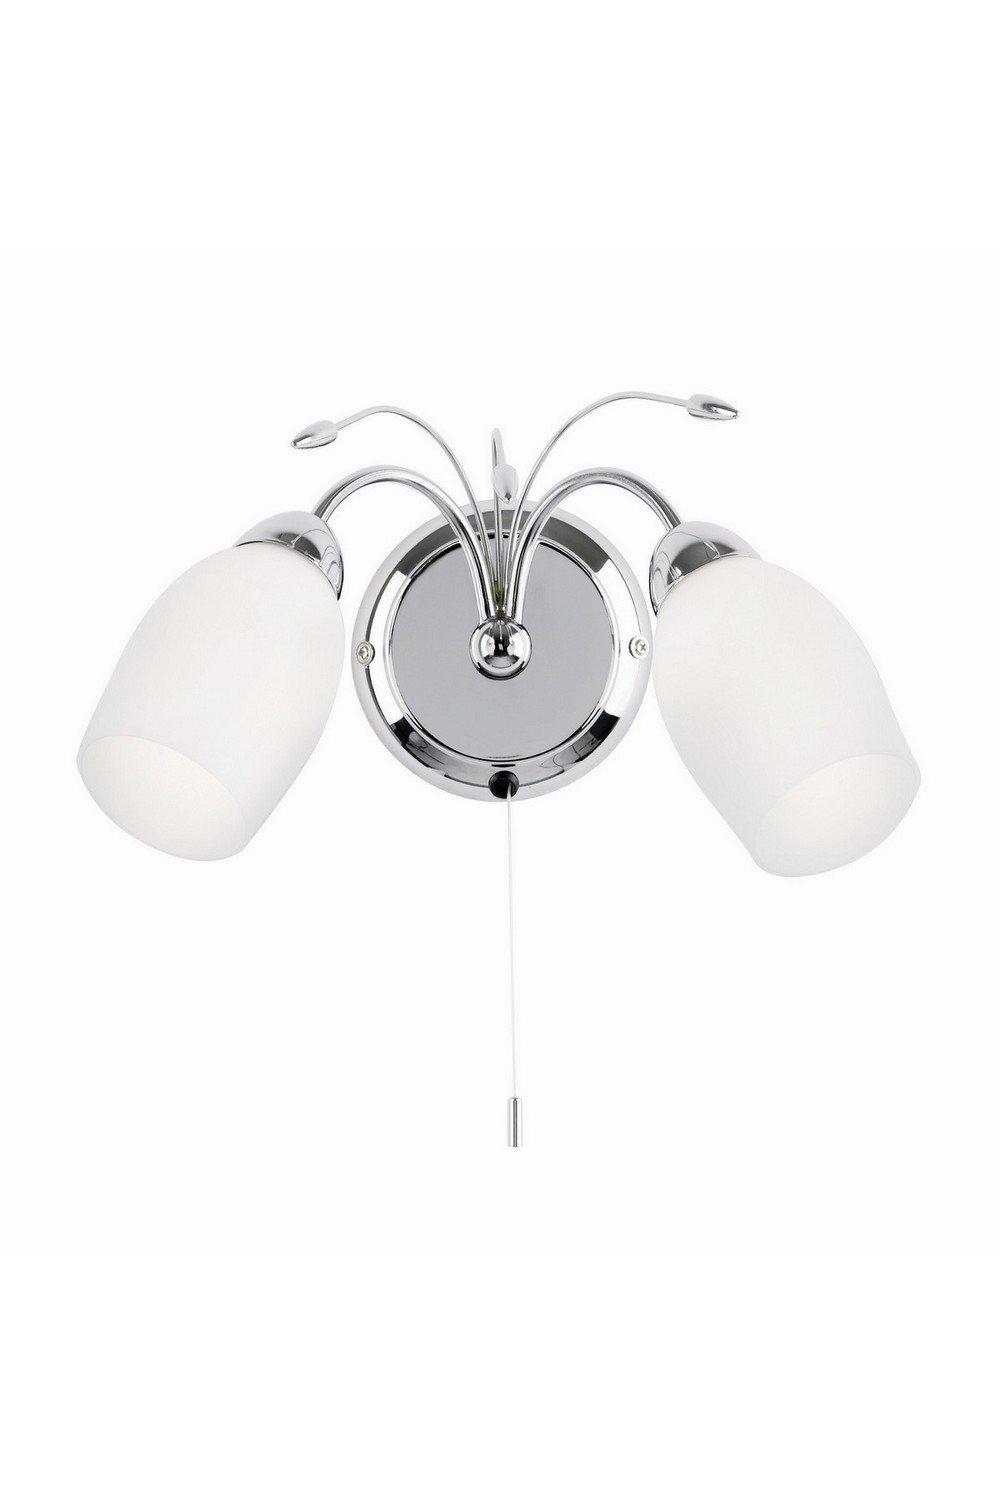 Meadow 2 Light Indoor Wall Light Chrome with White Glass E14